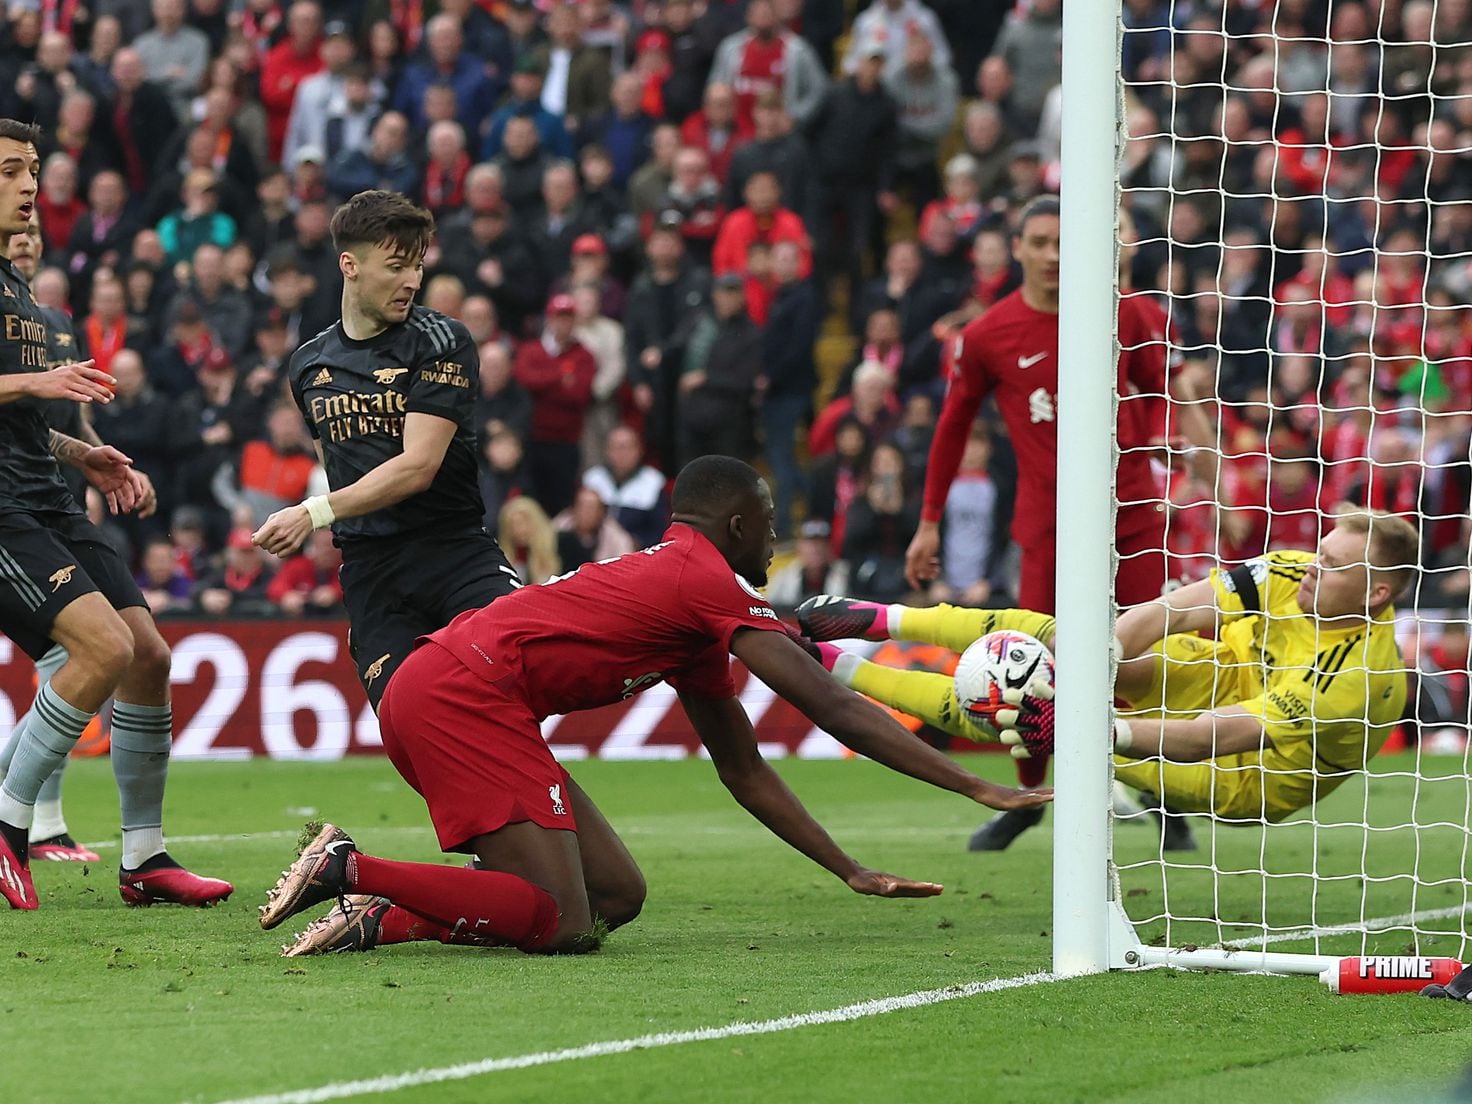 EXTENDED HIGHLIGHTS: Nine-man LFC defeated by last-minute own goal